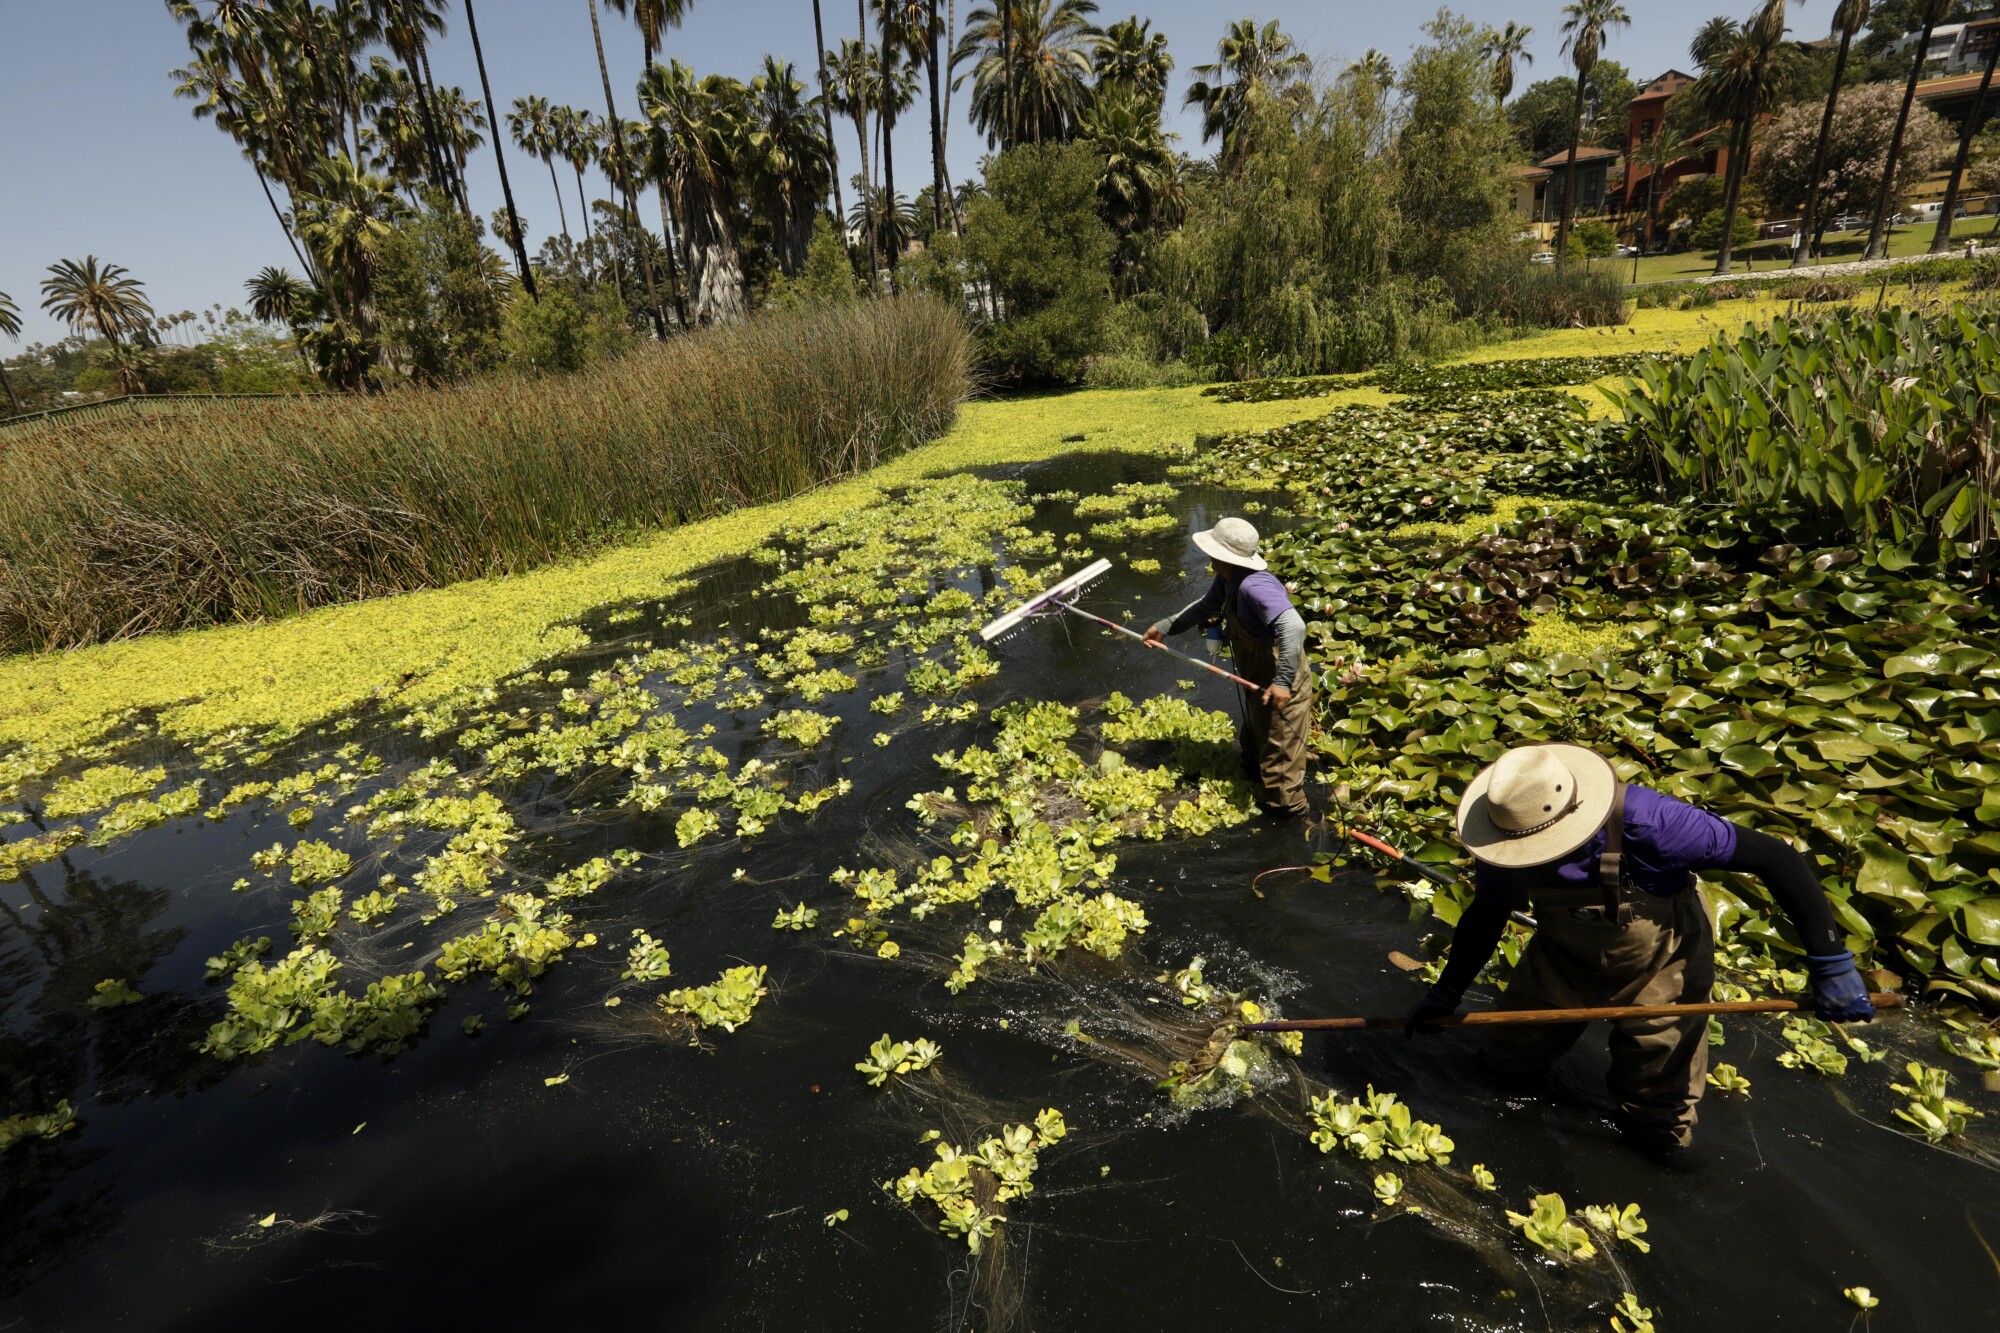 Workers clear water lettuce from Echo Park Lake